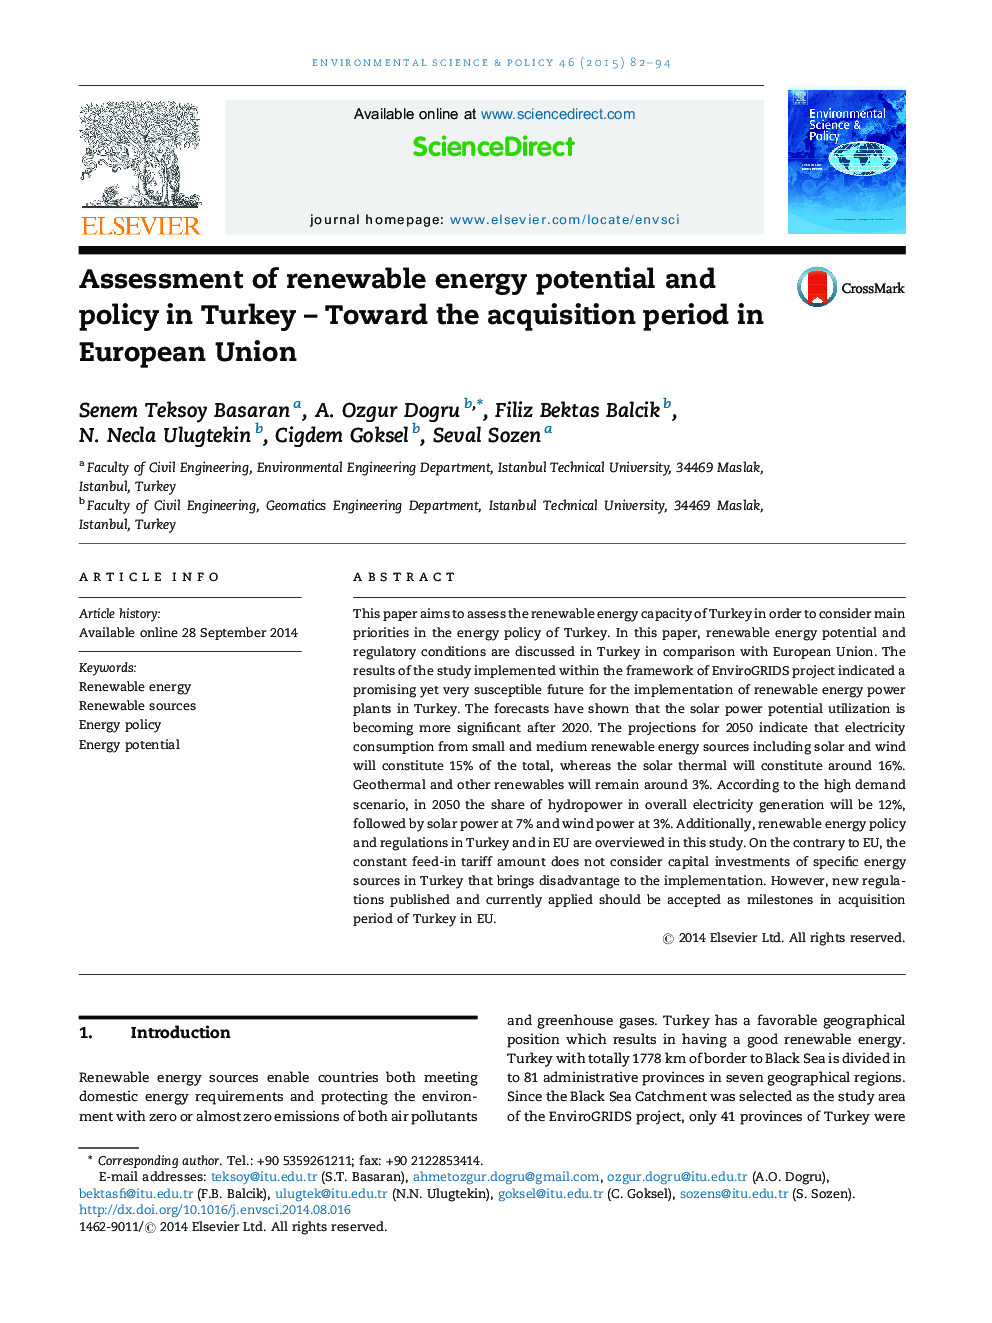 Assessment of renewable energy potential and policy in Turkey – Toward the acquisition period in European Union